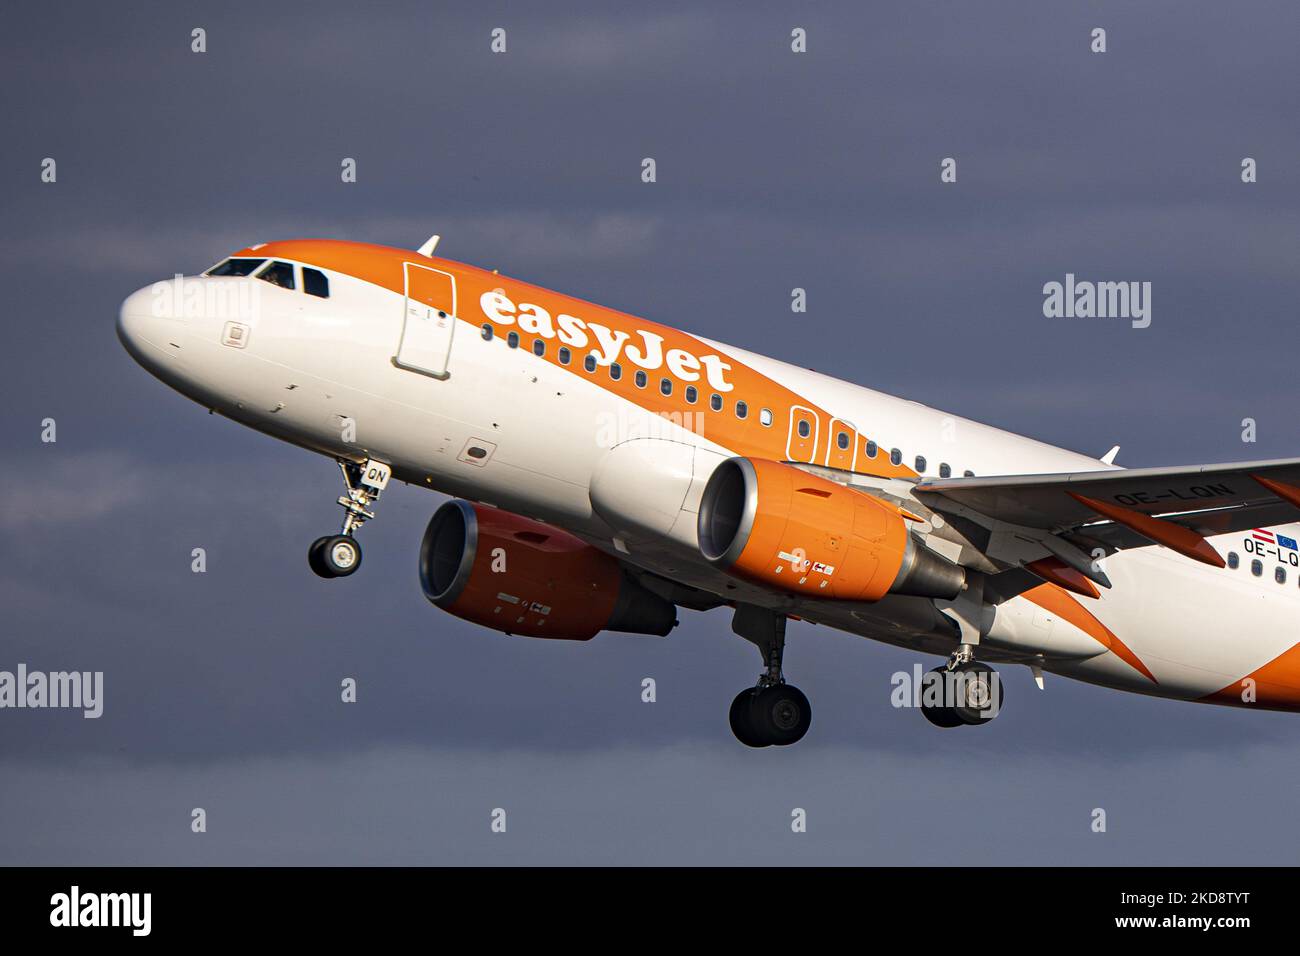 EasyJet Europe Airbus A319 aircraft as seen during taxiing, rotate and take off phase flying as departs from Amsterdam Schiphol Airport. The A319 has the registration OE-LQN. EasyJet is a British multinational low cost airline group with headquarters at London Luton Airport while EasyJet Europe Airline GmbH is based in Vienna Austria with a fleet of 127 airplane. The aviation industry is showing recovery and increased demand after the Covid-19 Coronavirus pandemic measures have been easing across the worlds. Amsterdam, Netherlands on April 27, 2022 (Photo by Nicolas Economou/NurPhoto) Stock Photo